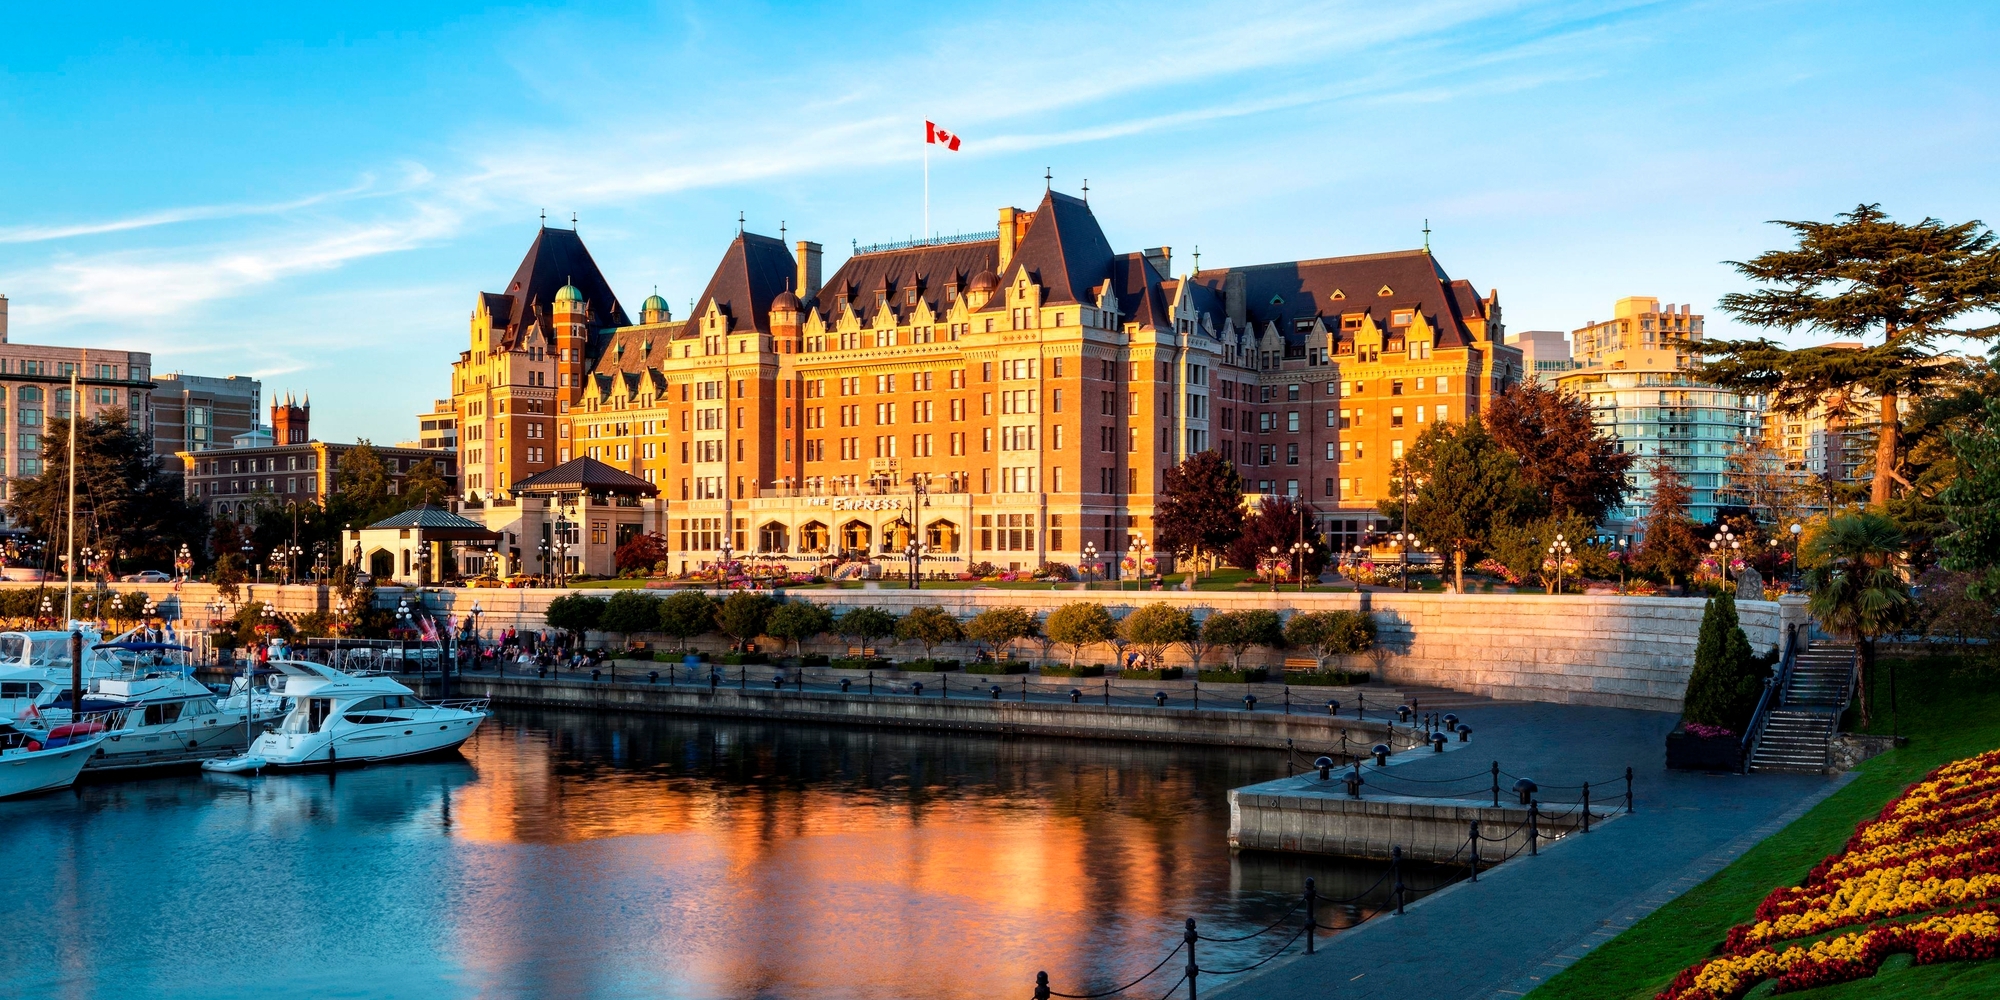 Victoria inner harbour and the Fairmont Empress hotel